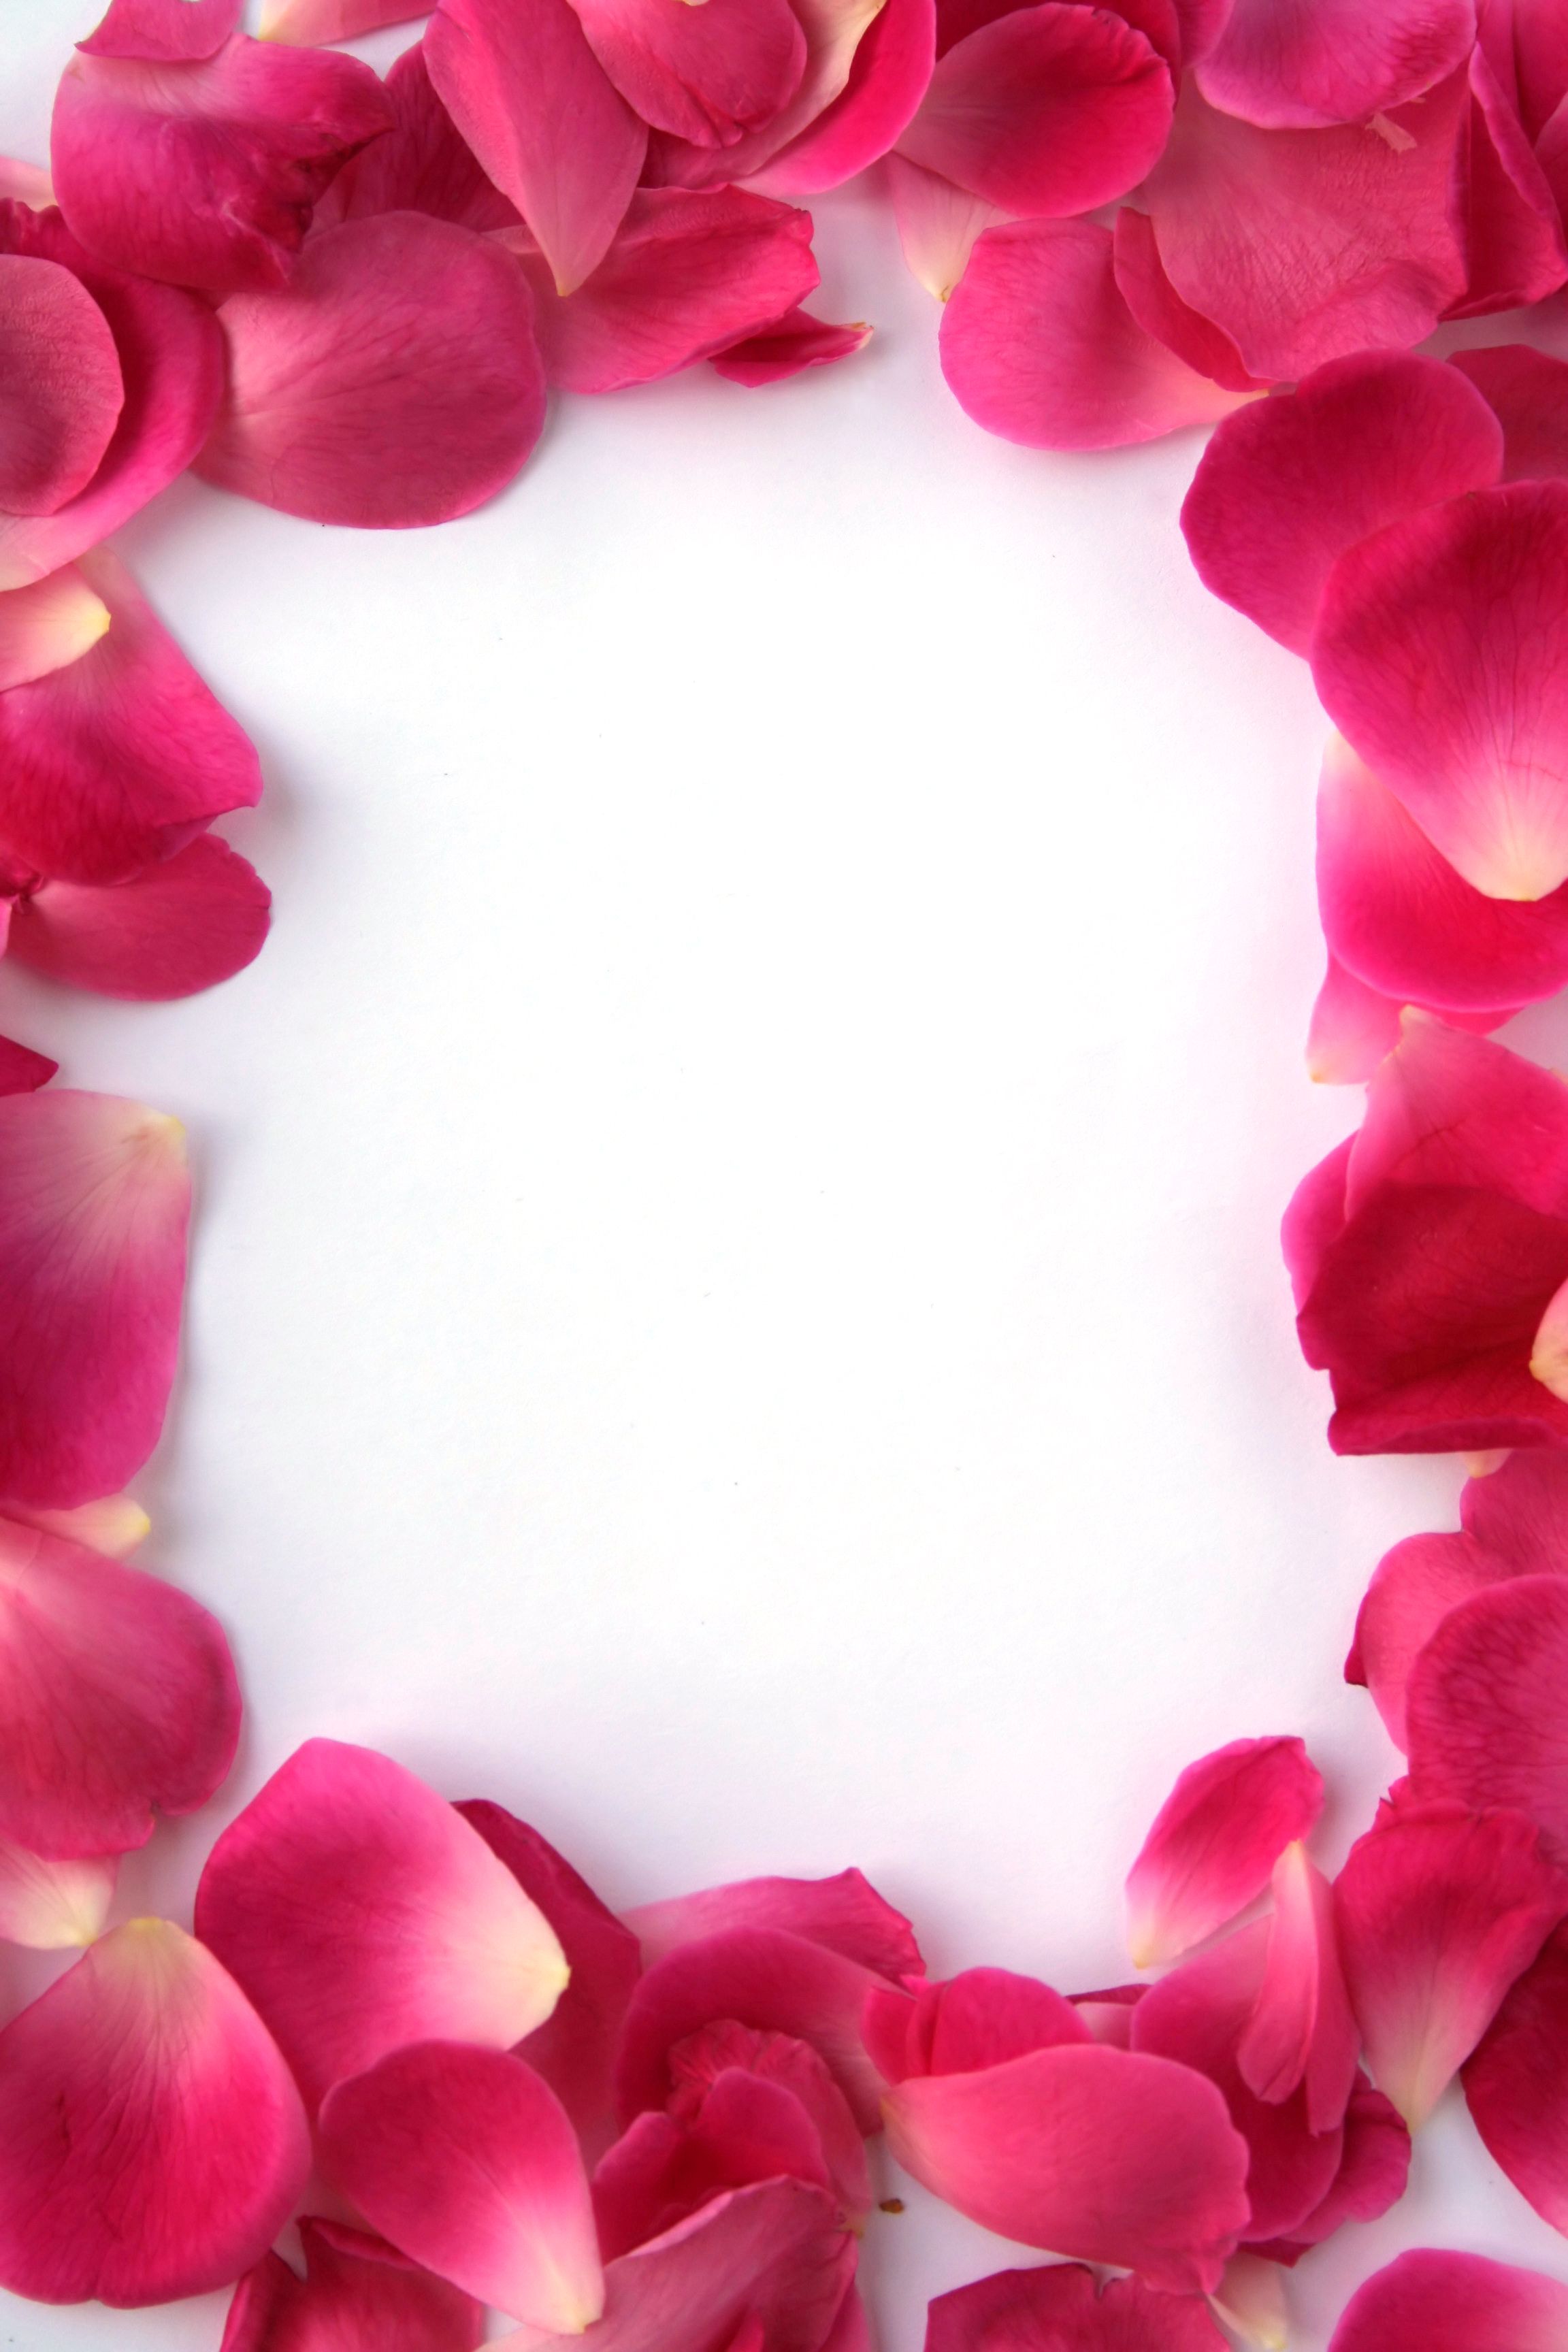 Flower Petals Wallpapers High Quality | Download Free